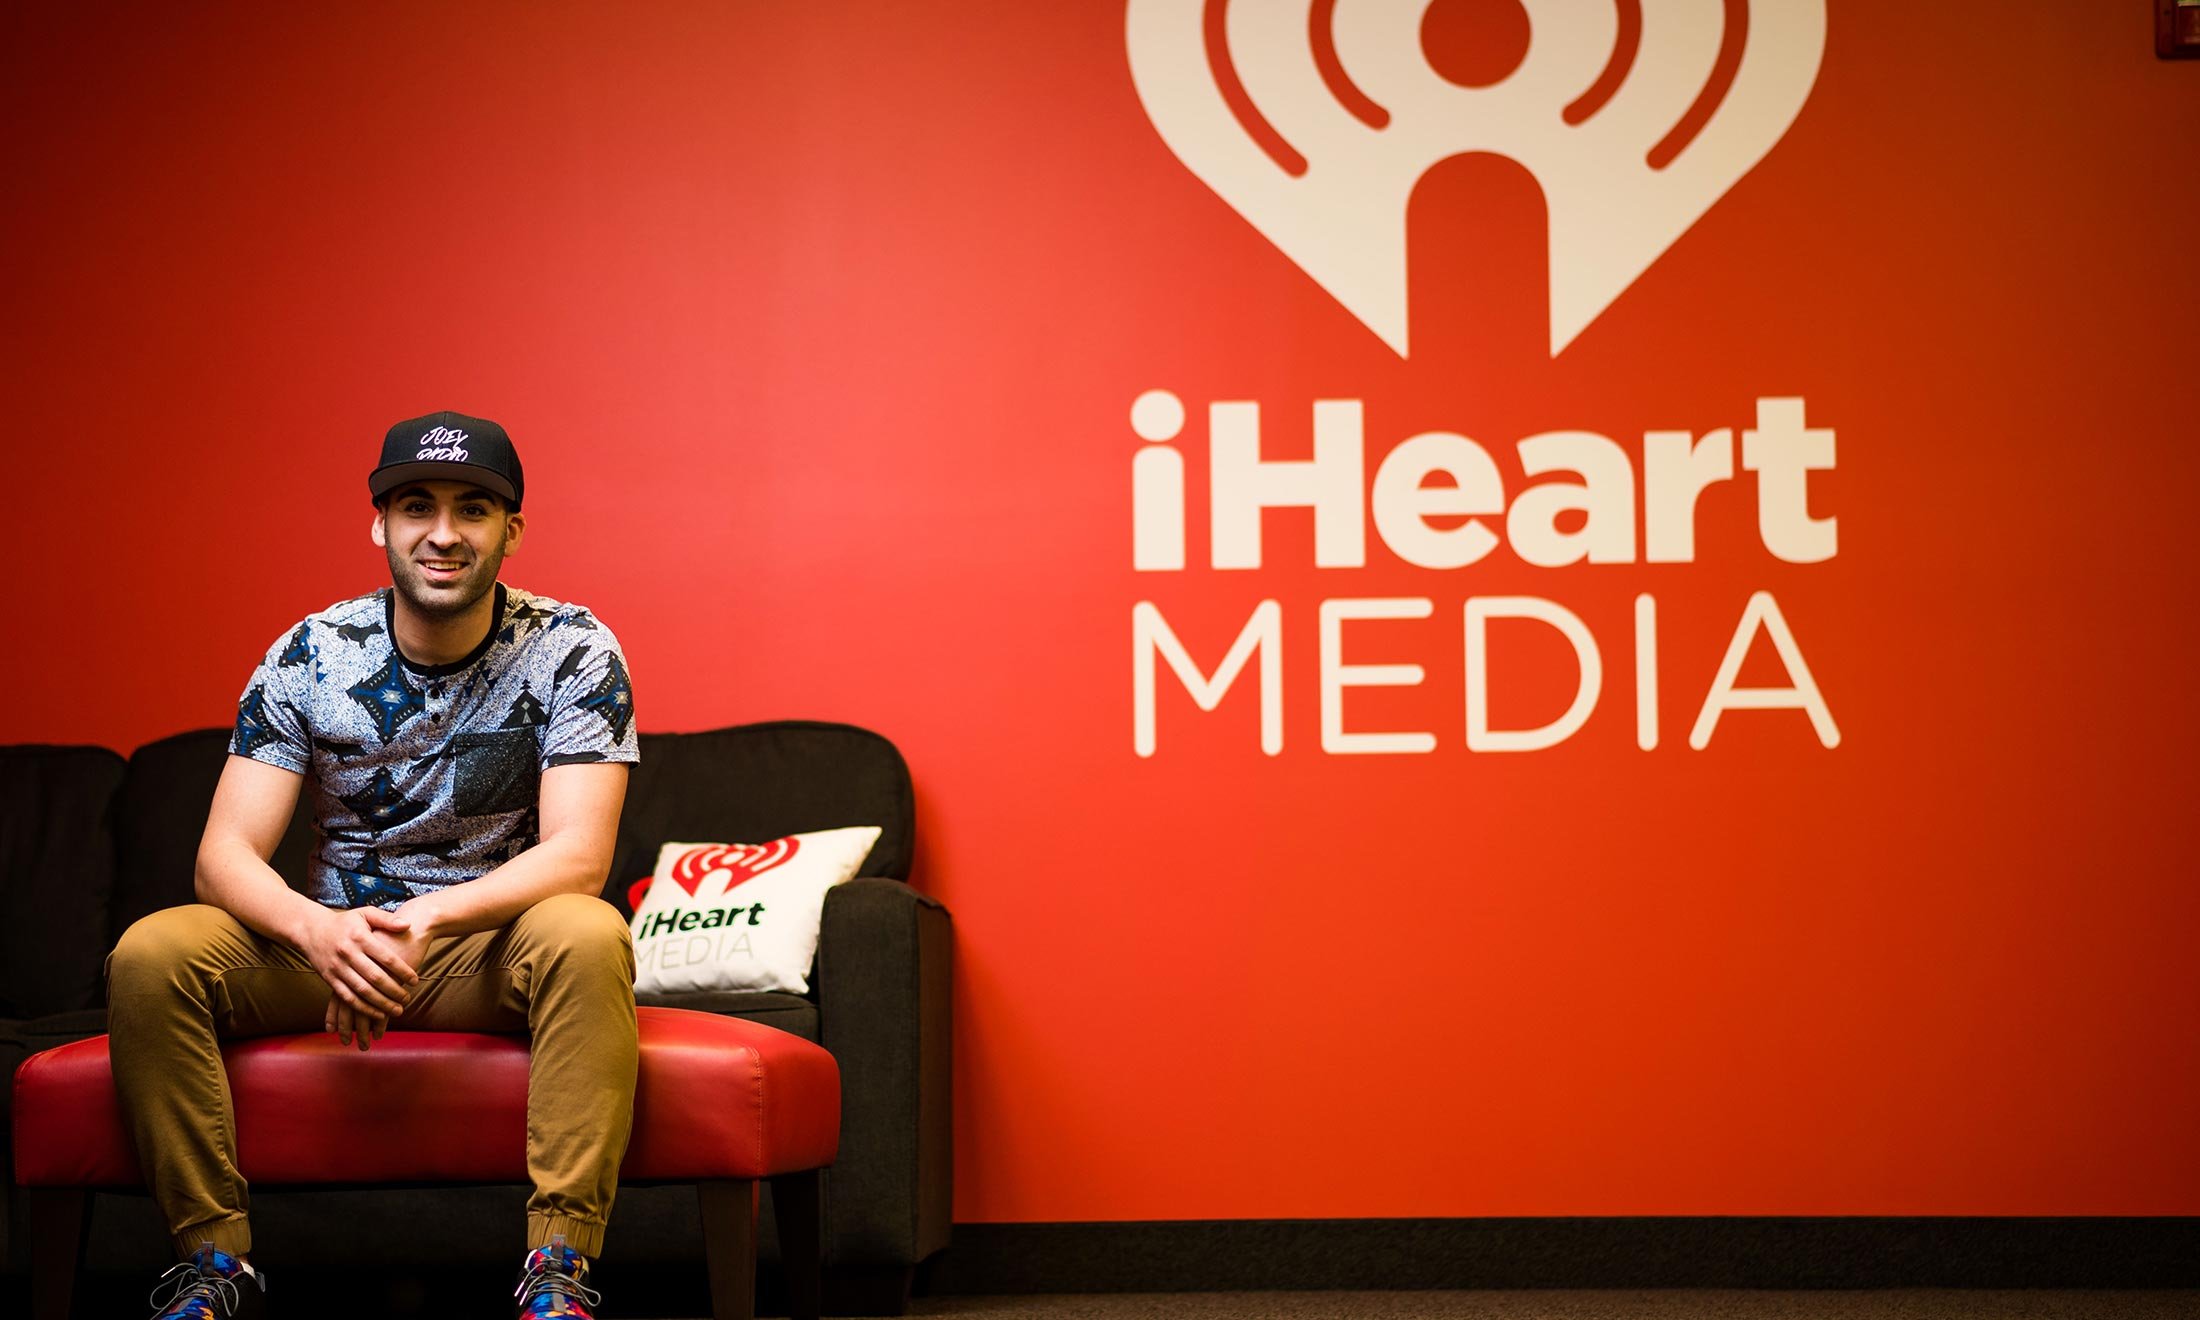 Joe Namou rests on a couch at the entrance of the iHeartRadio studio 